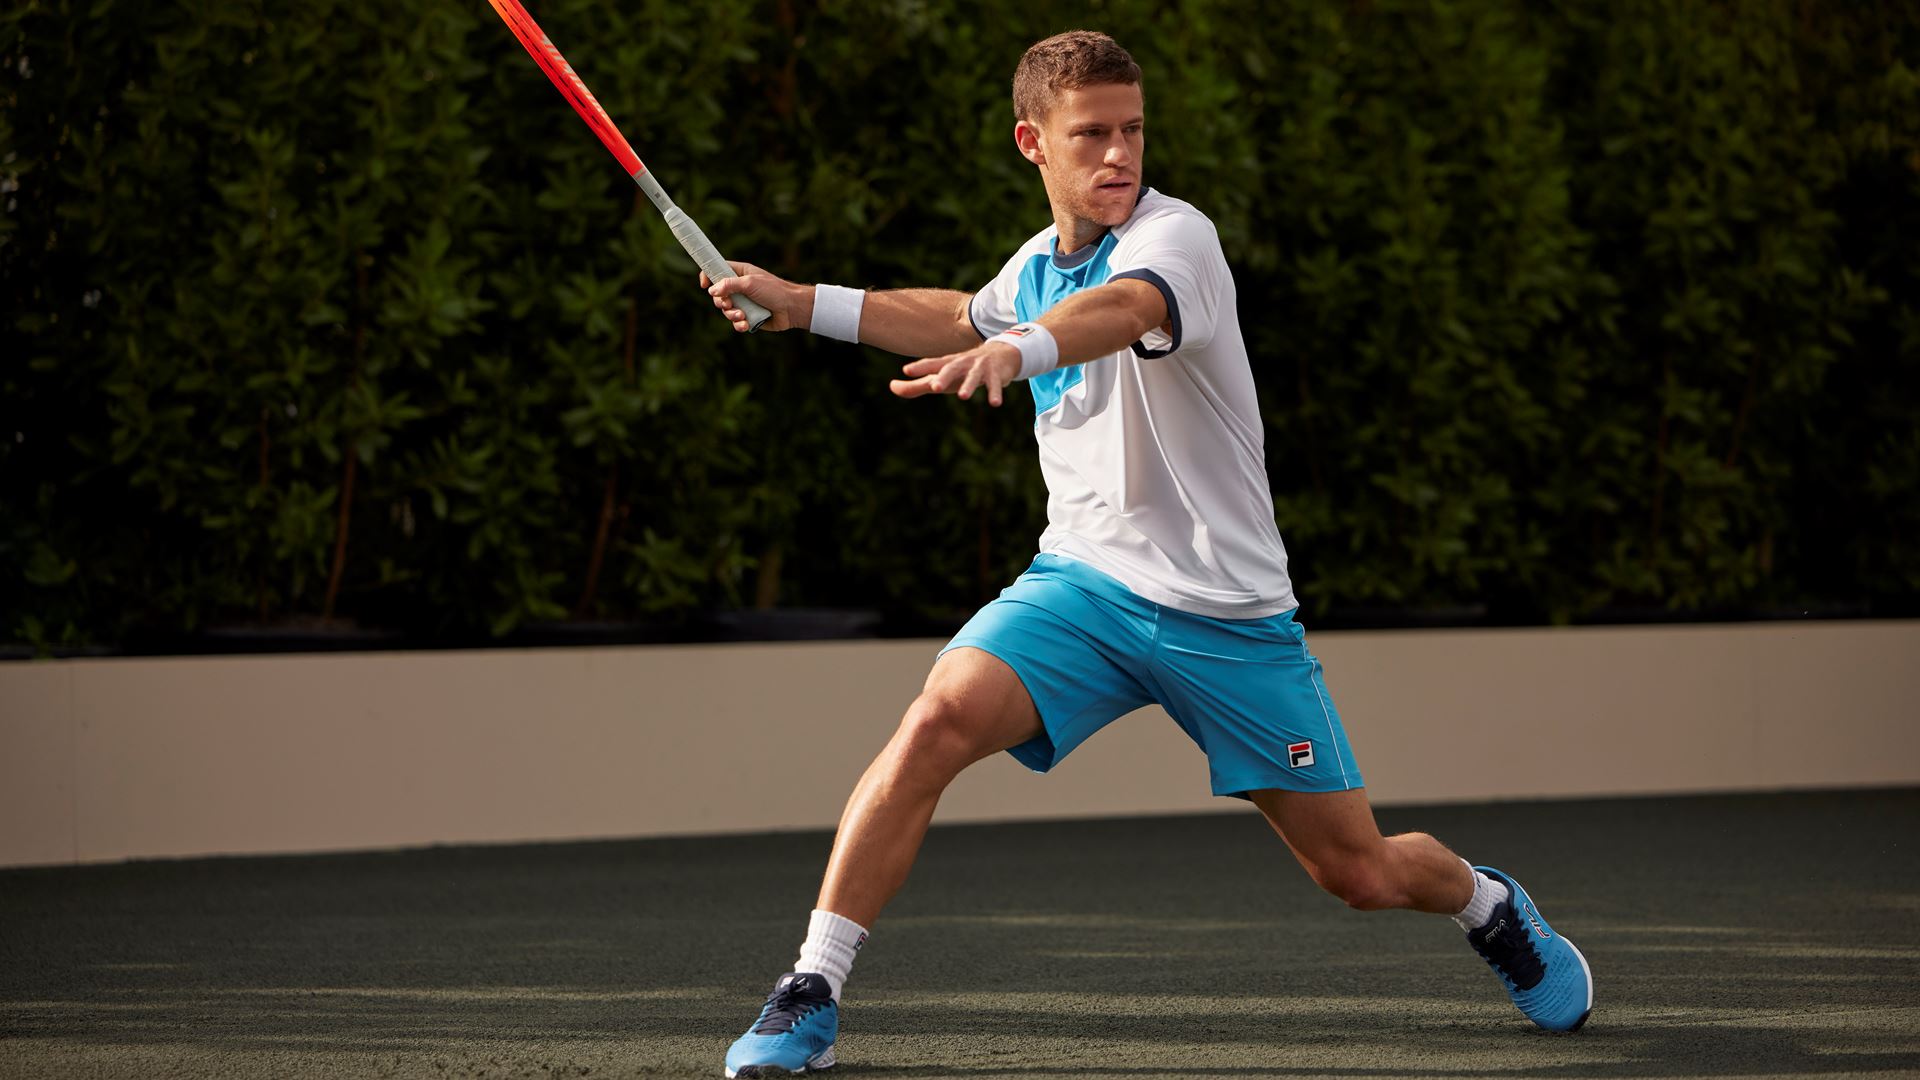 FILA-Sponsored Players To Sport All-New 'Tie Breaker' Tennis Performance  Collection At 2023 BNP Paribas Open